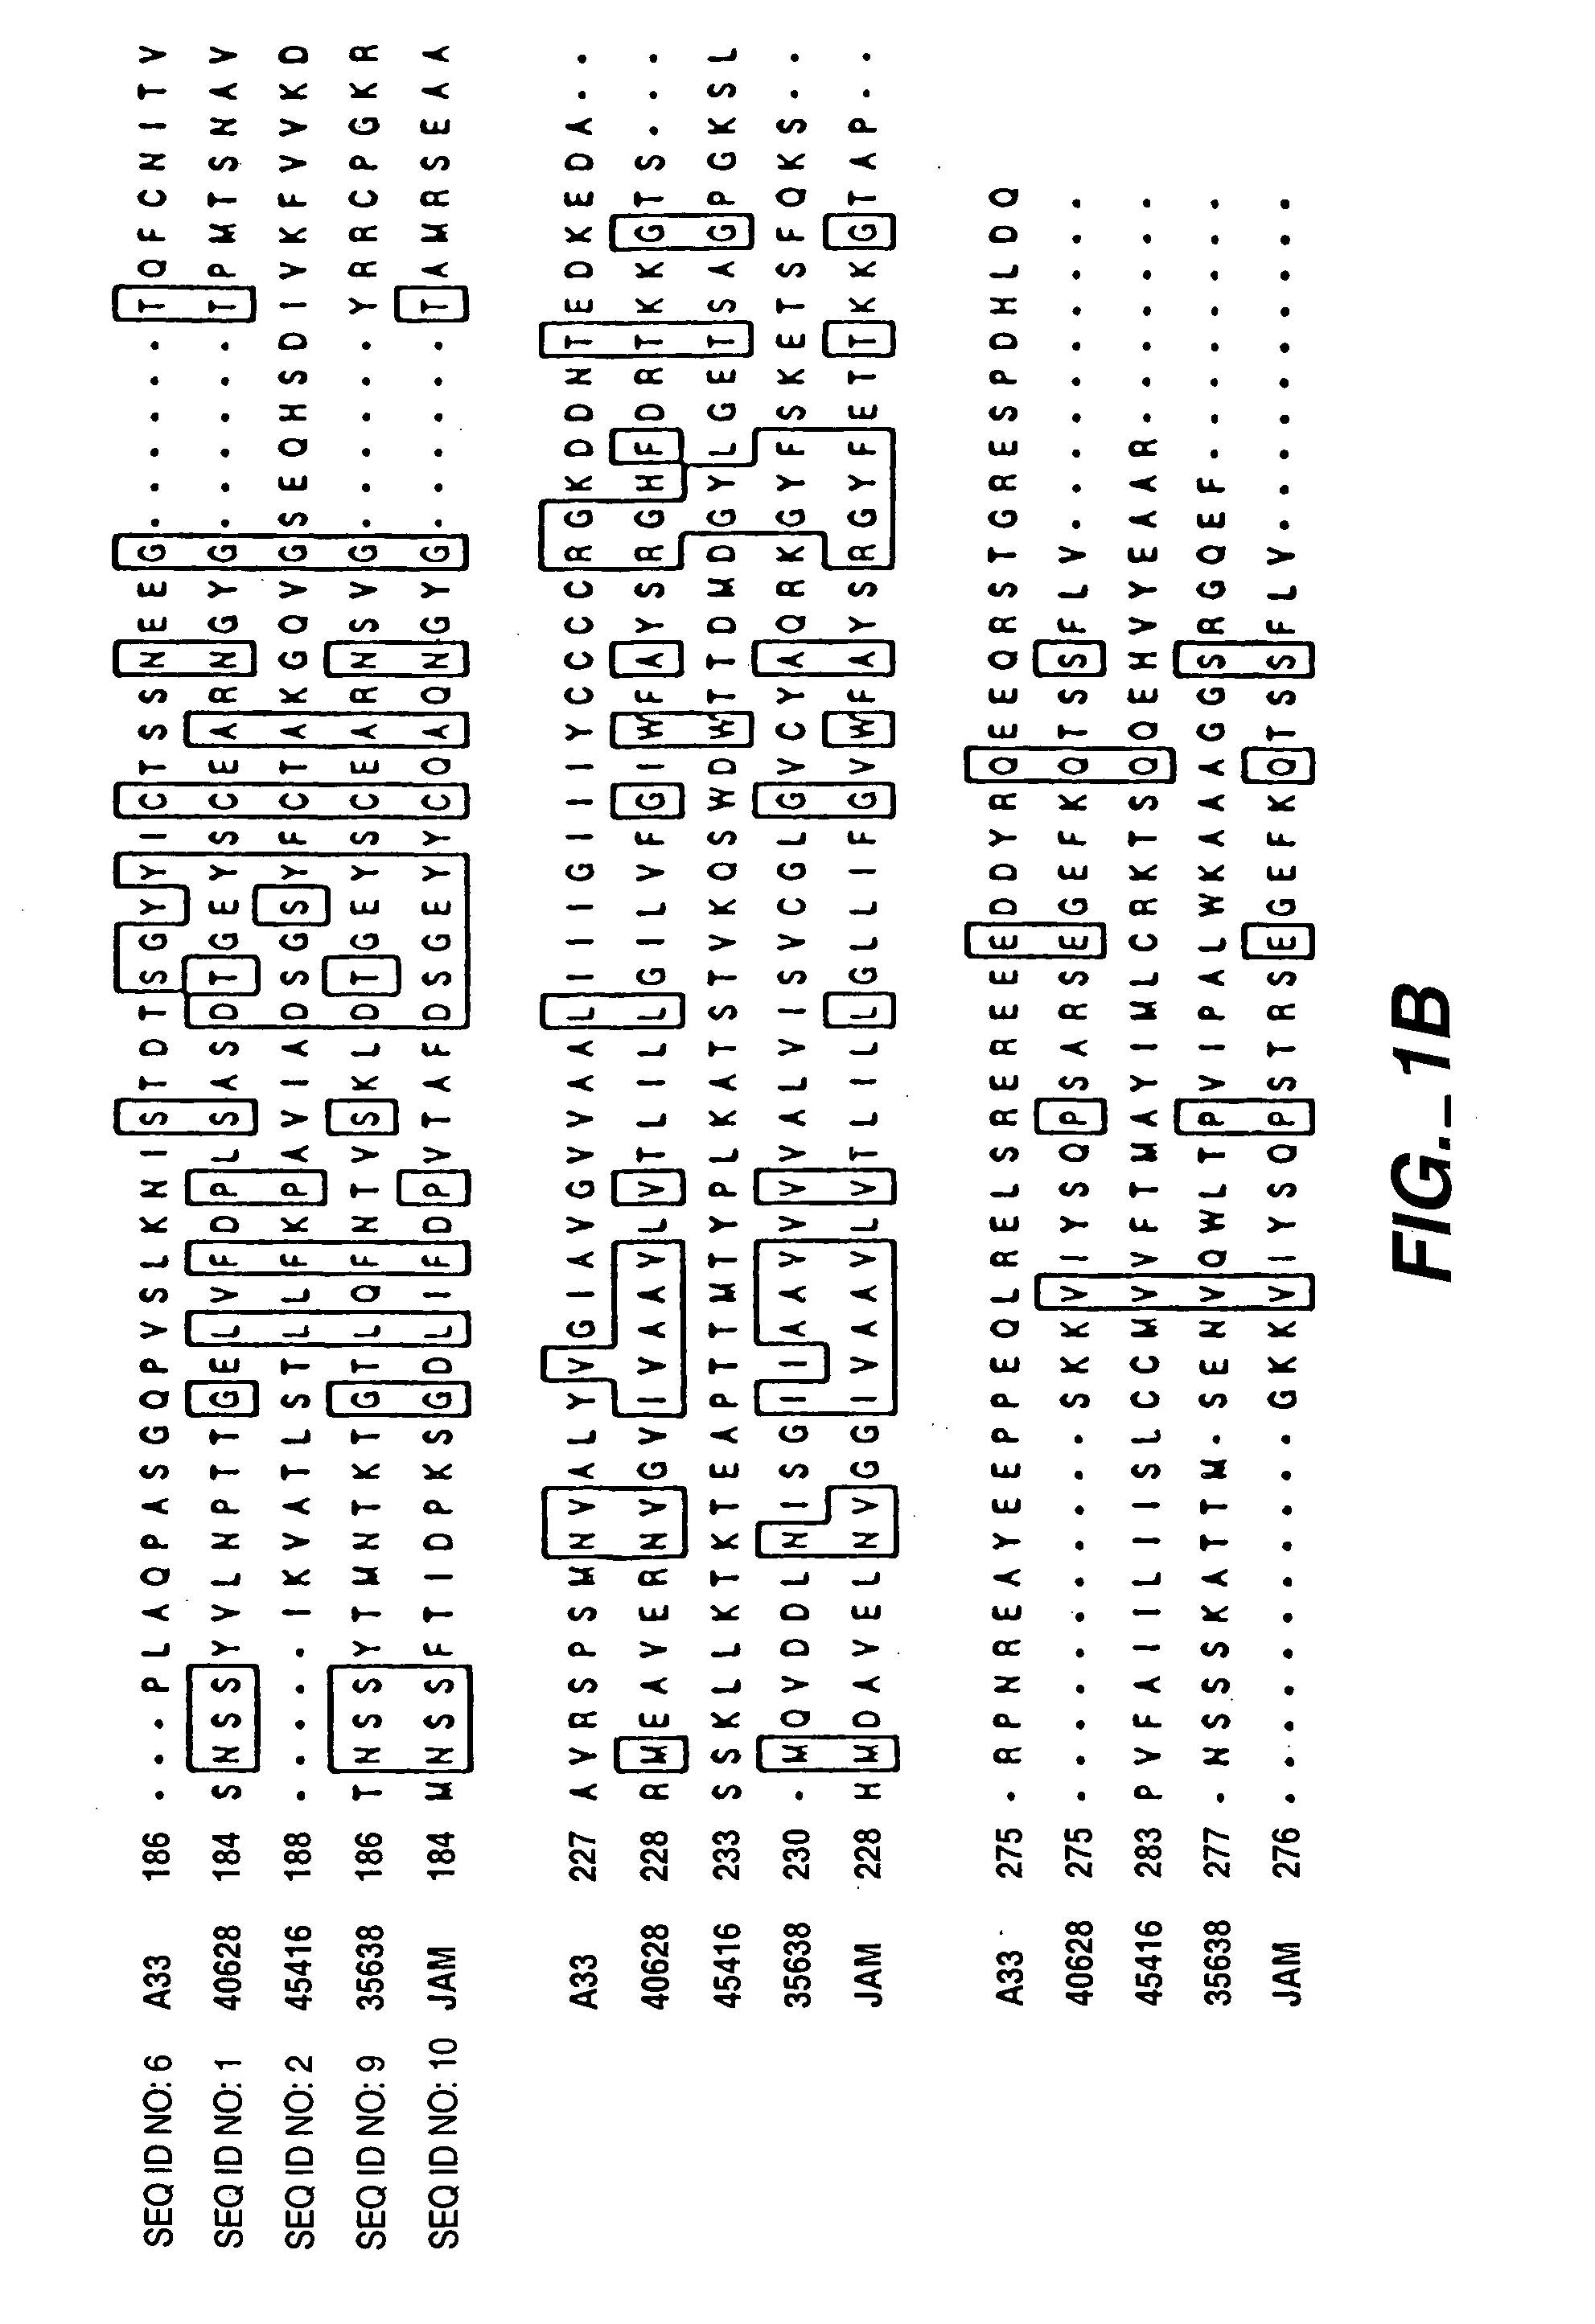 Compounds, compositions and methods for the treatment of diseases characterized by A-33 related antigens